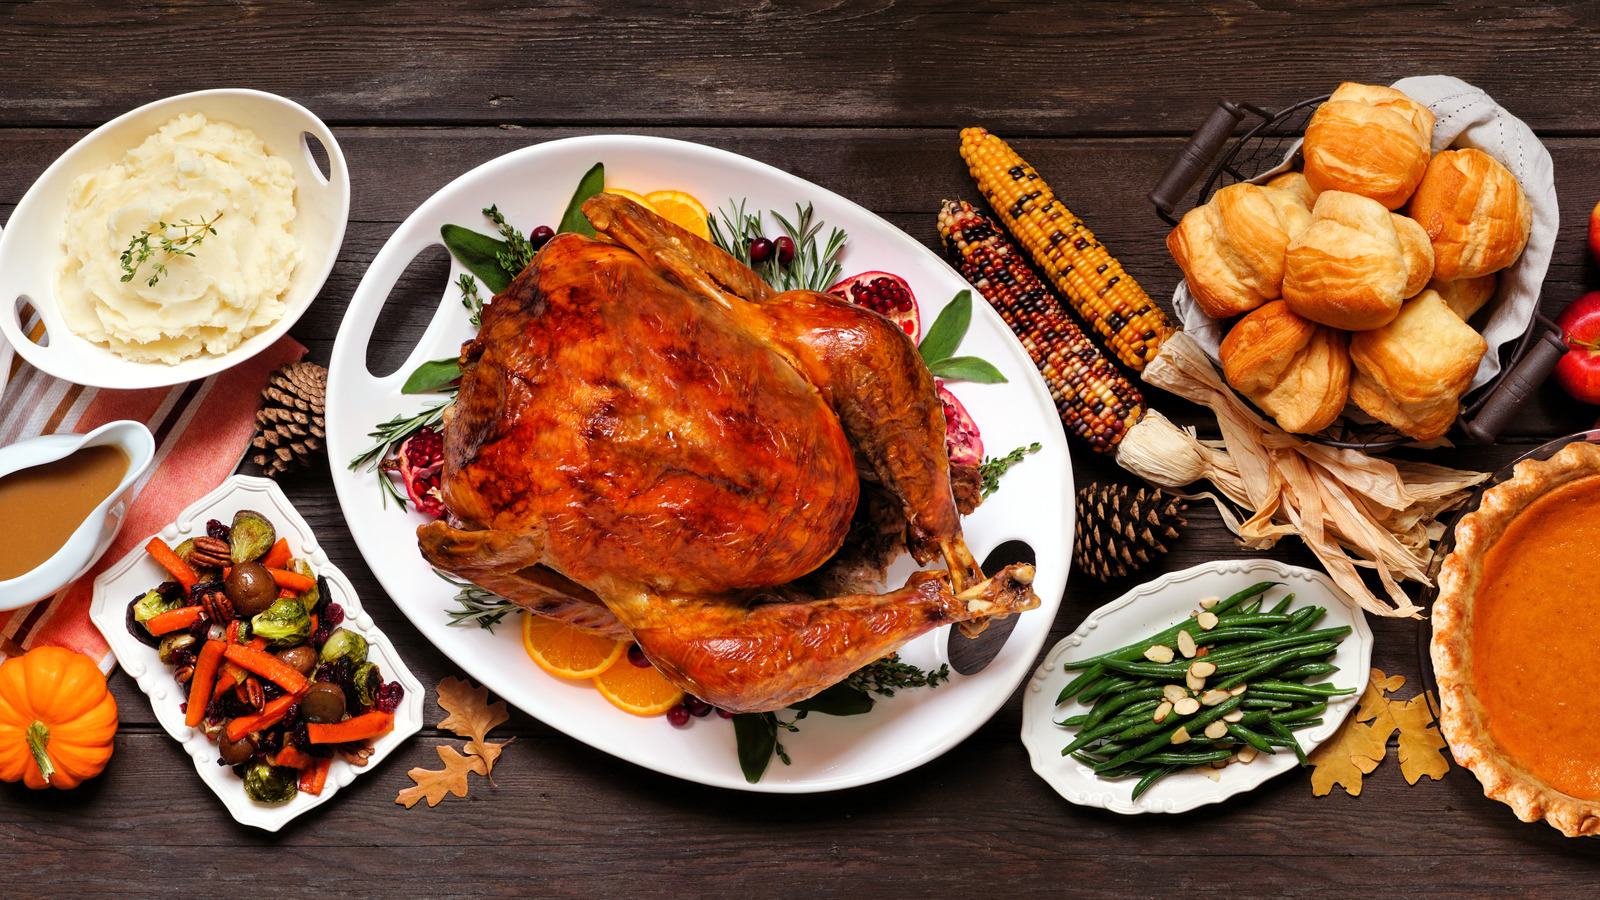 https://www.tastingtable.com/img/gallery/why-you-should-start-roasting-your-thanksgiving-turkey-upside-down/l-intro-1665781181.jpg